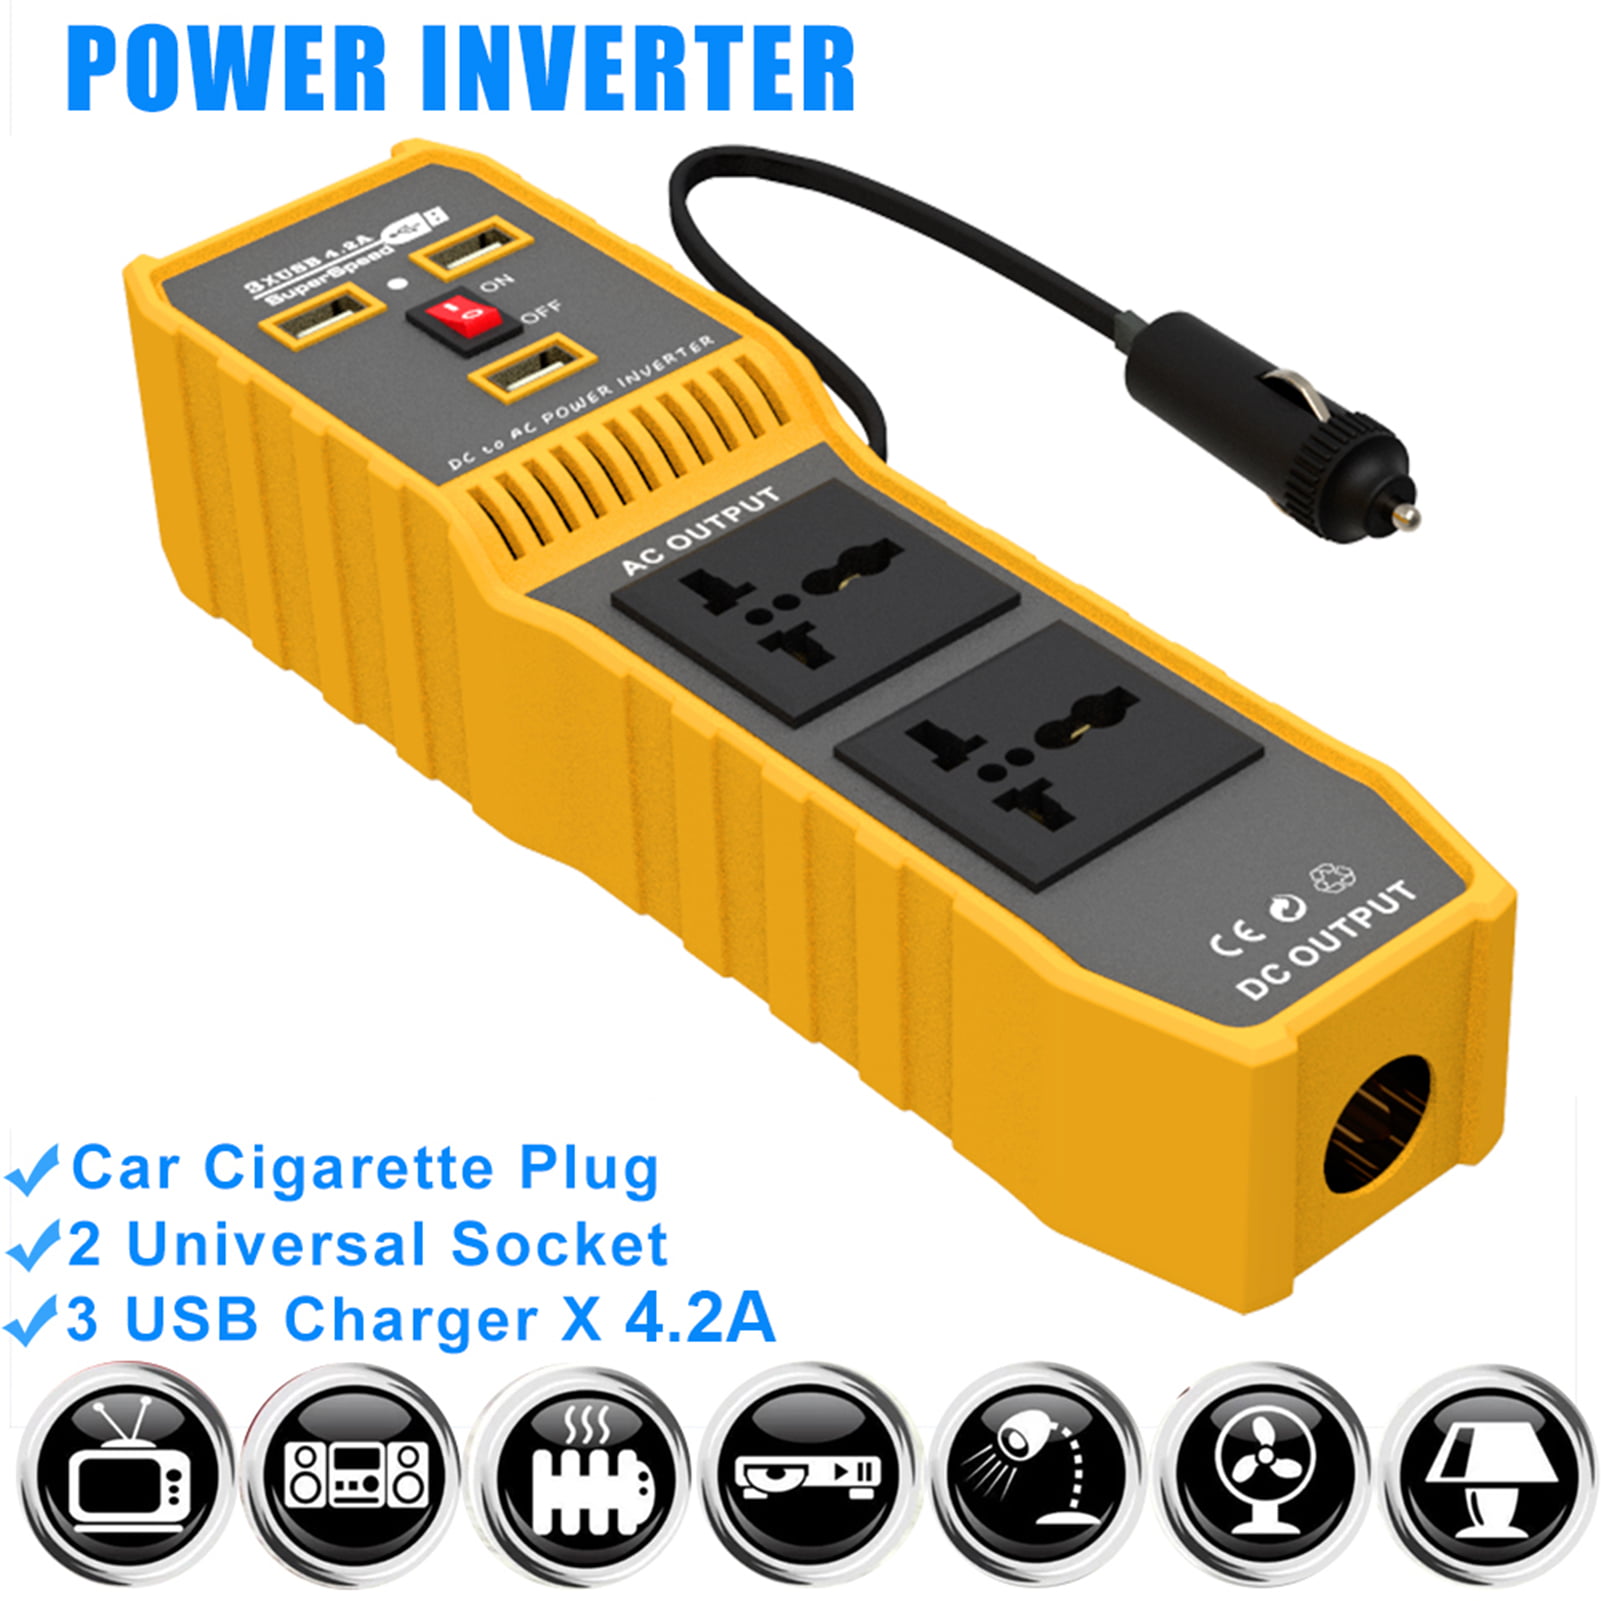 White BYGD 150W Car Power Inverter DC 12V to 110V AC Converter with 3 Charger Outlets and Dual 2.4A USB Sockets Car Adapter 